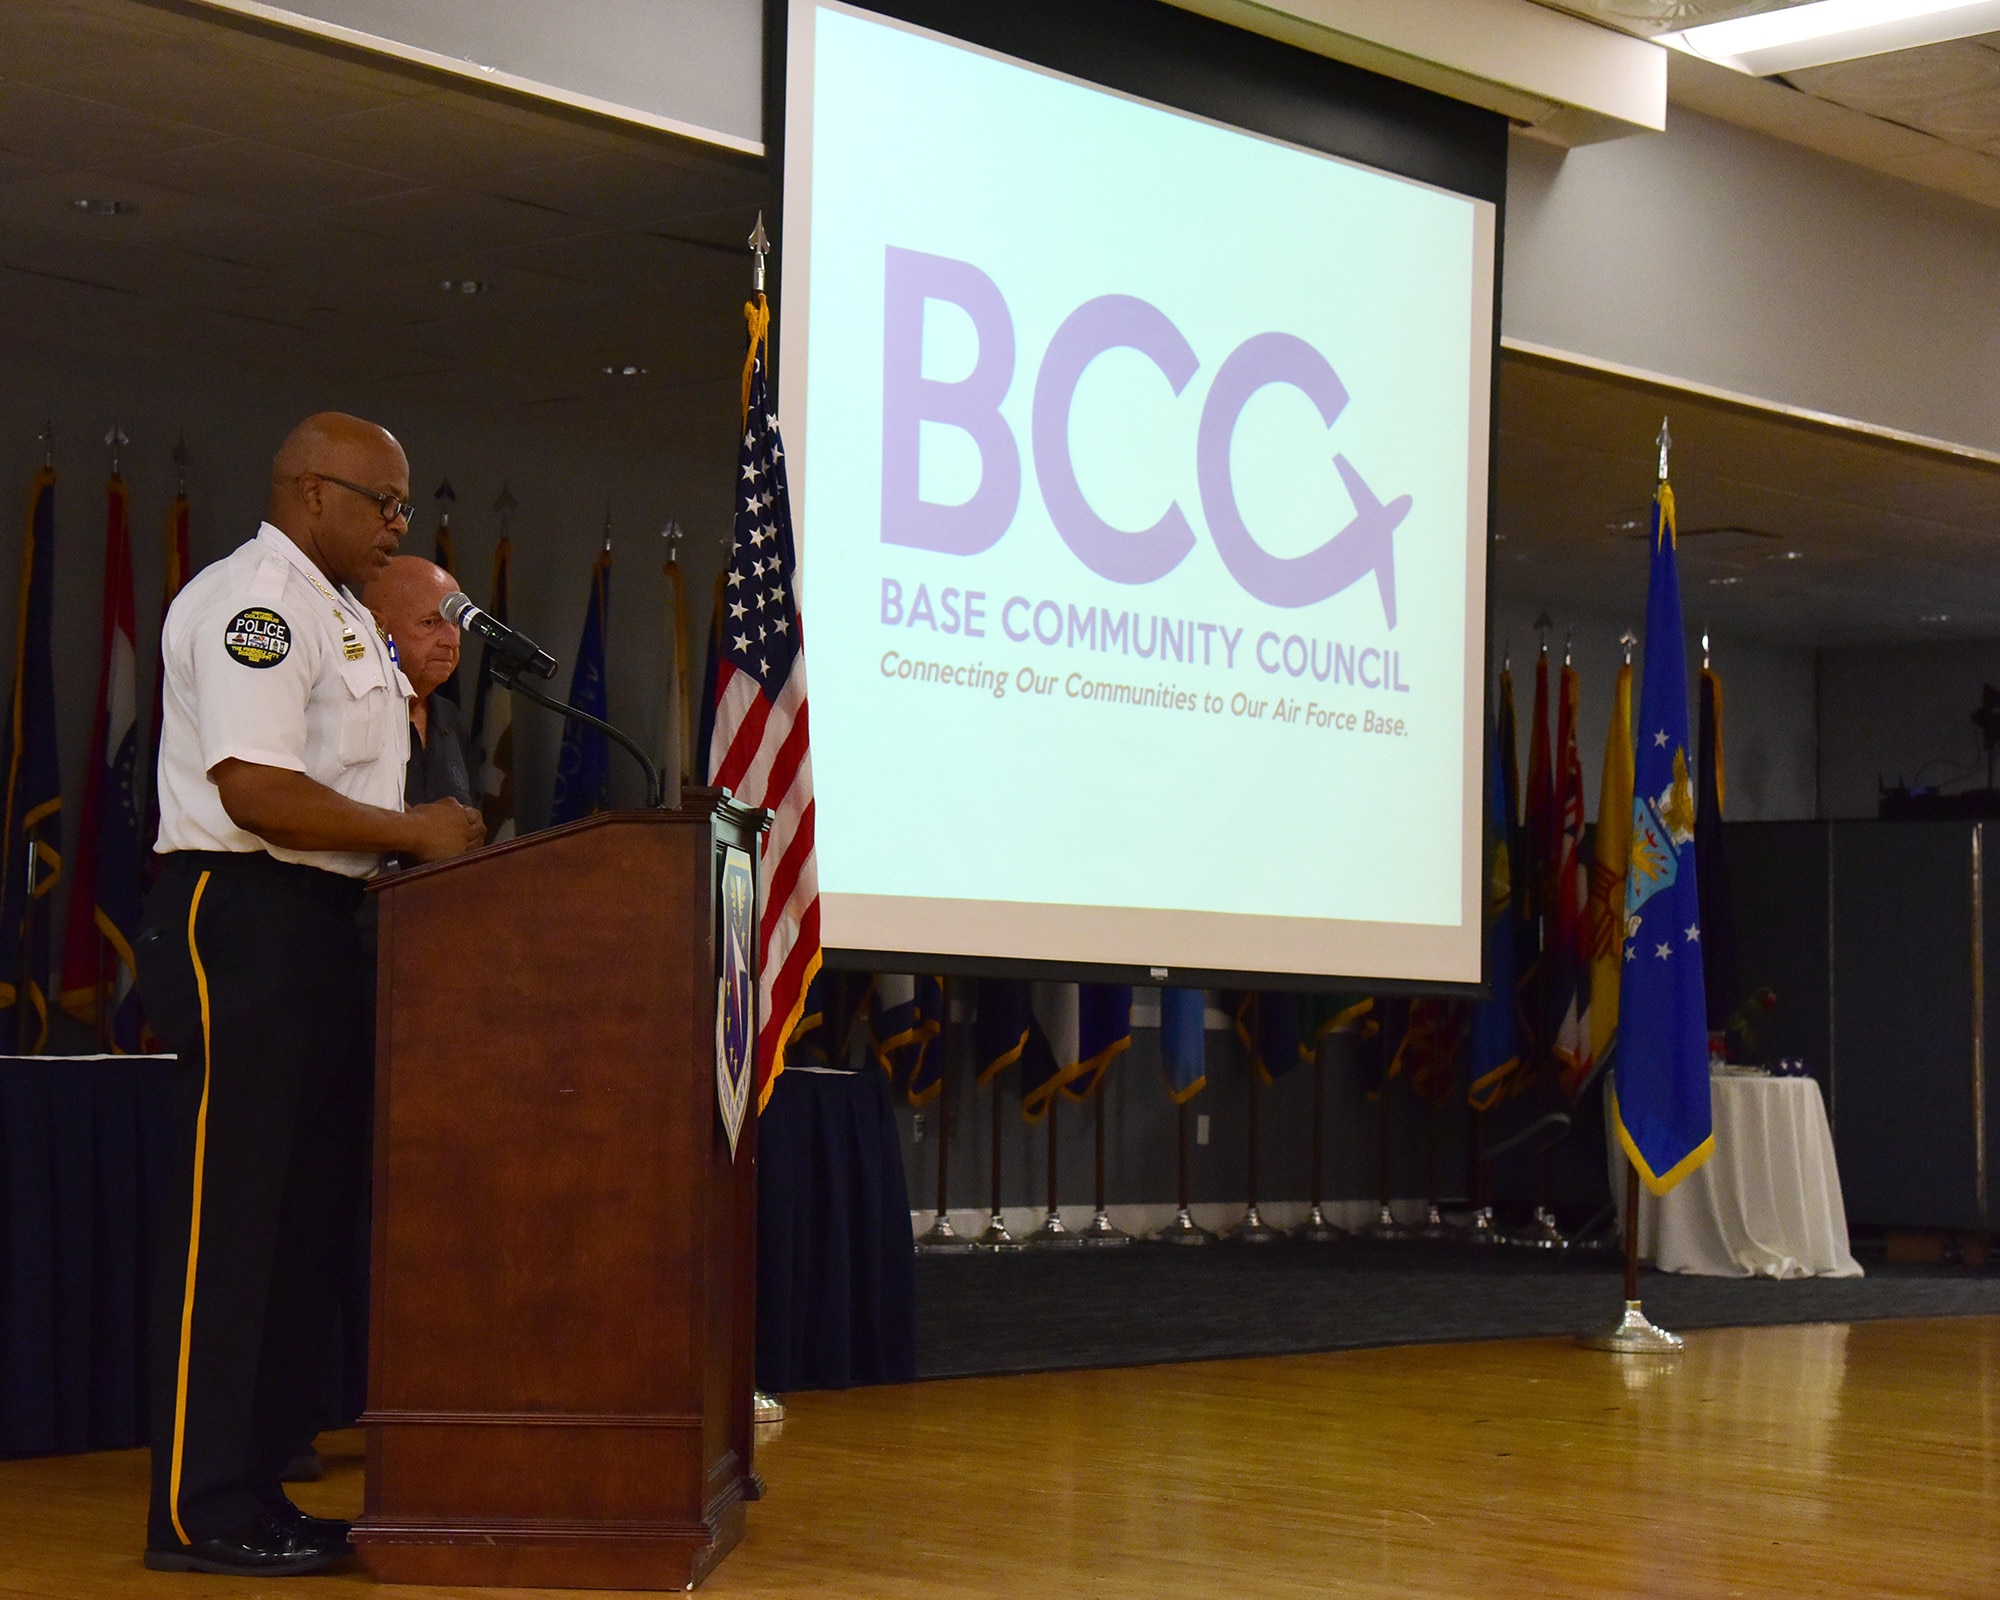 Chief Fred Shelton, Columbus Police Department, delivers the invocation for the Base Community Council meeting Sept. 10, 2019, on Columbus Air Force Base, Miss. At the meeting, the BCC revealed their new logo and invited Lt. Col. Nathaniel Wilds, 50th Flying Training Wing commander, to speak about his experiences in Columbus. (U.S. Air Force photo by Elizabeth Owens)